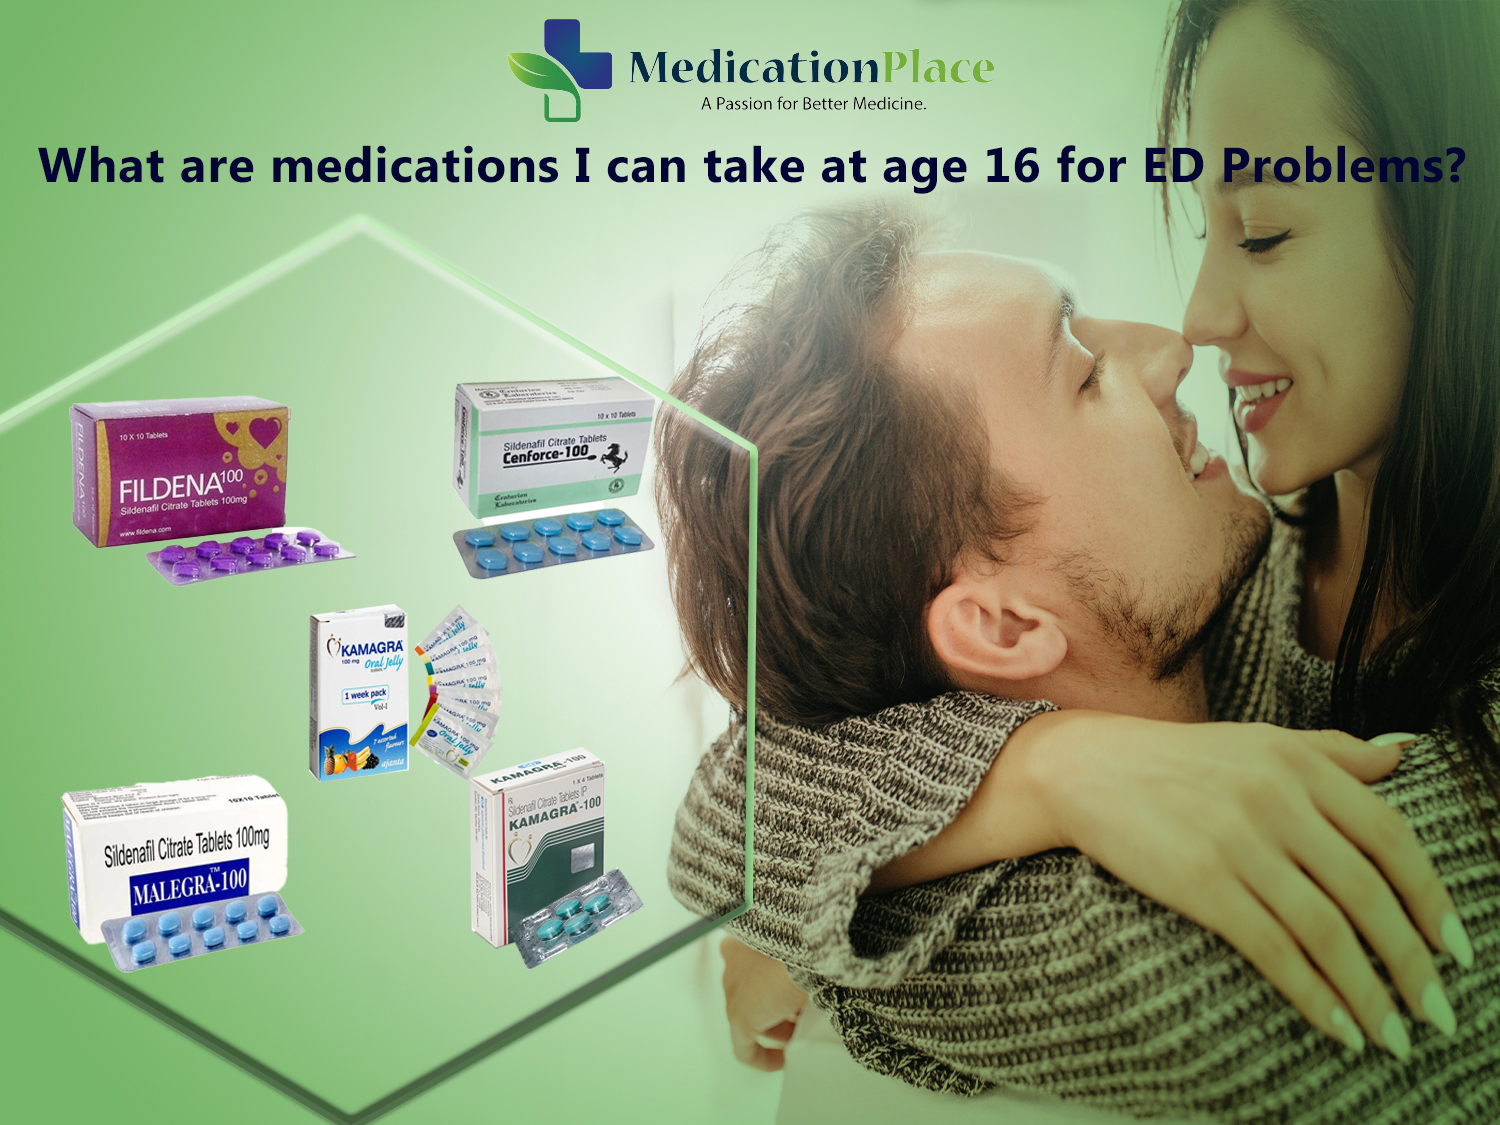 What are medications I can take at age 16 for Erectile Dysfunction ?